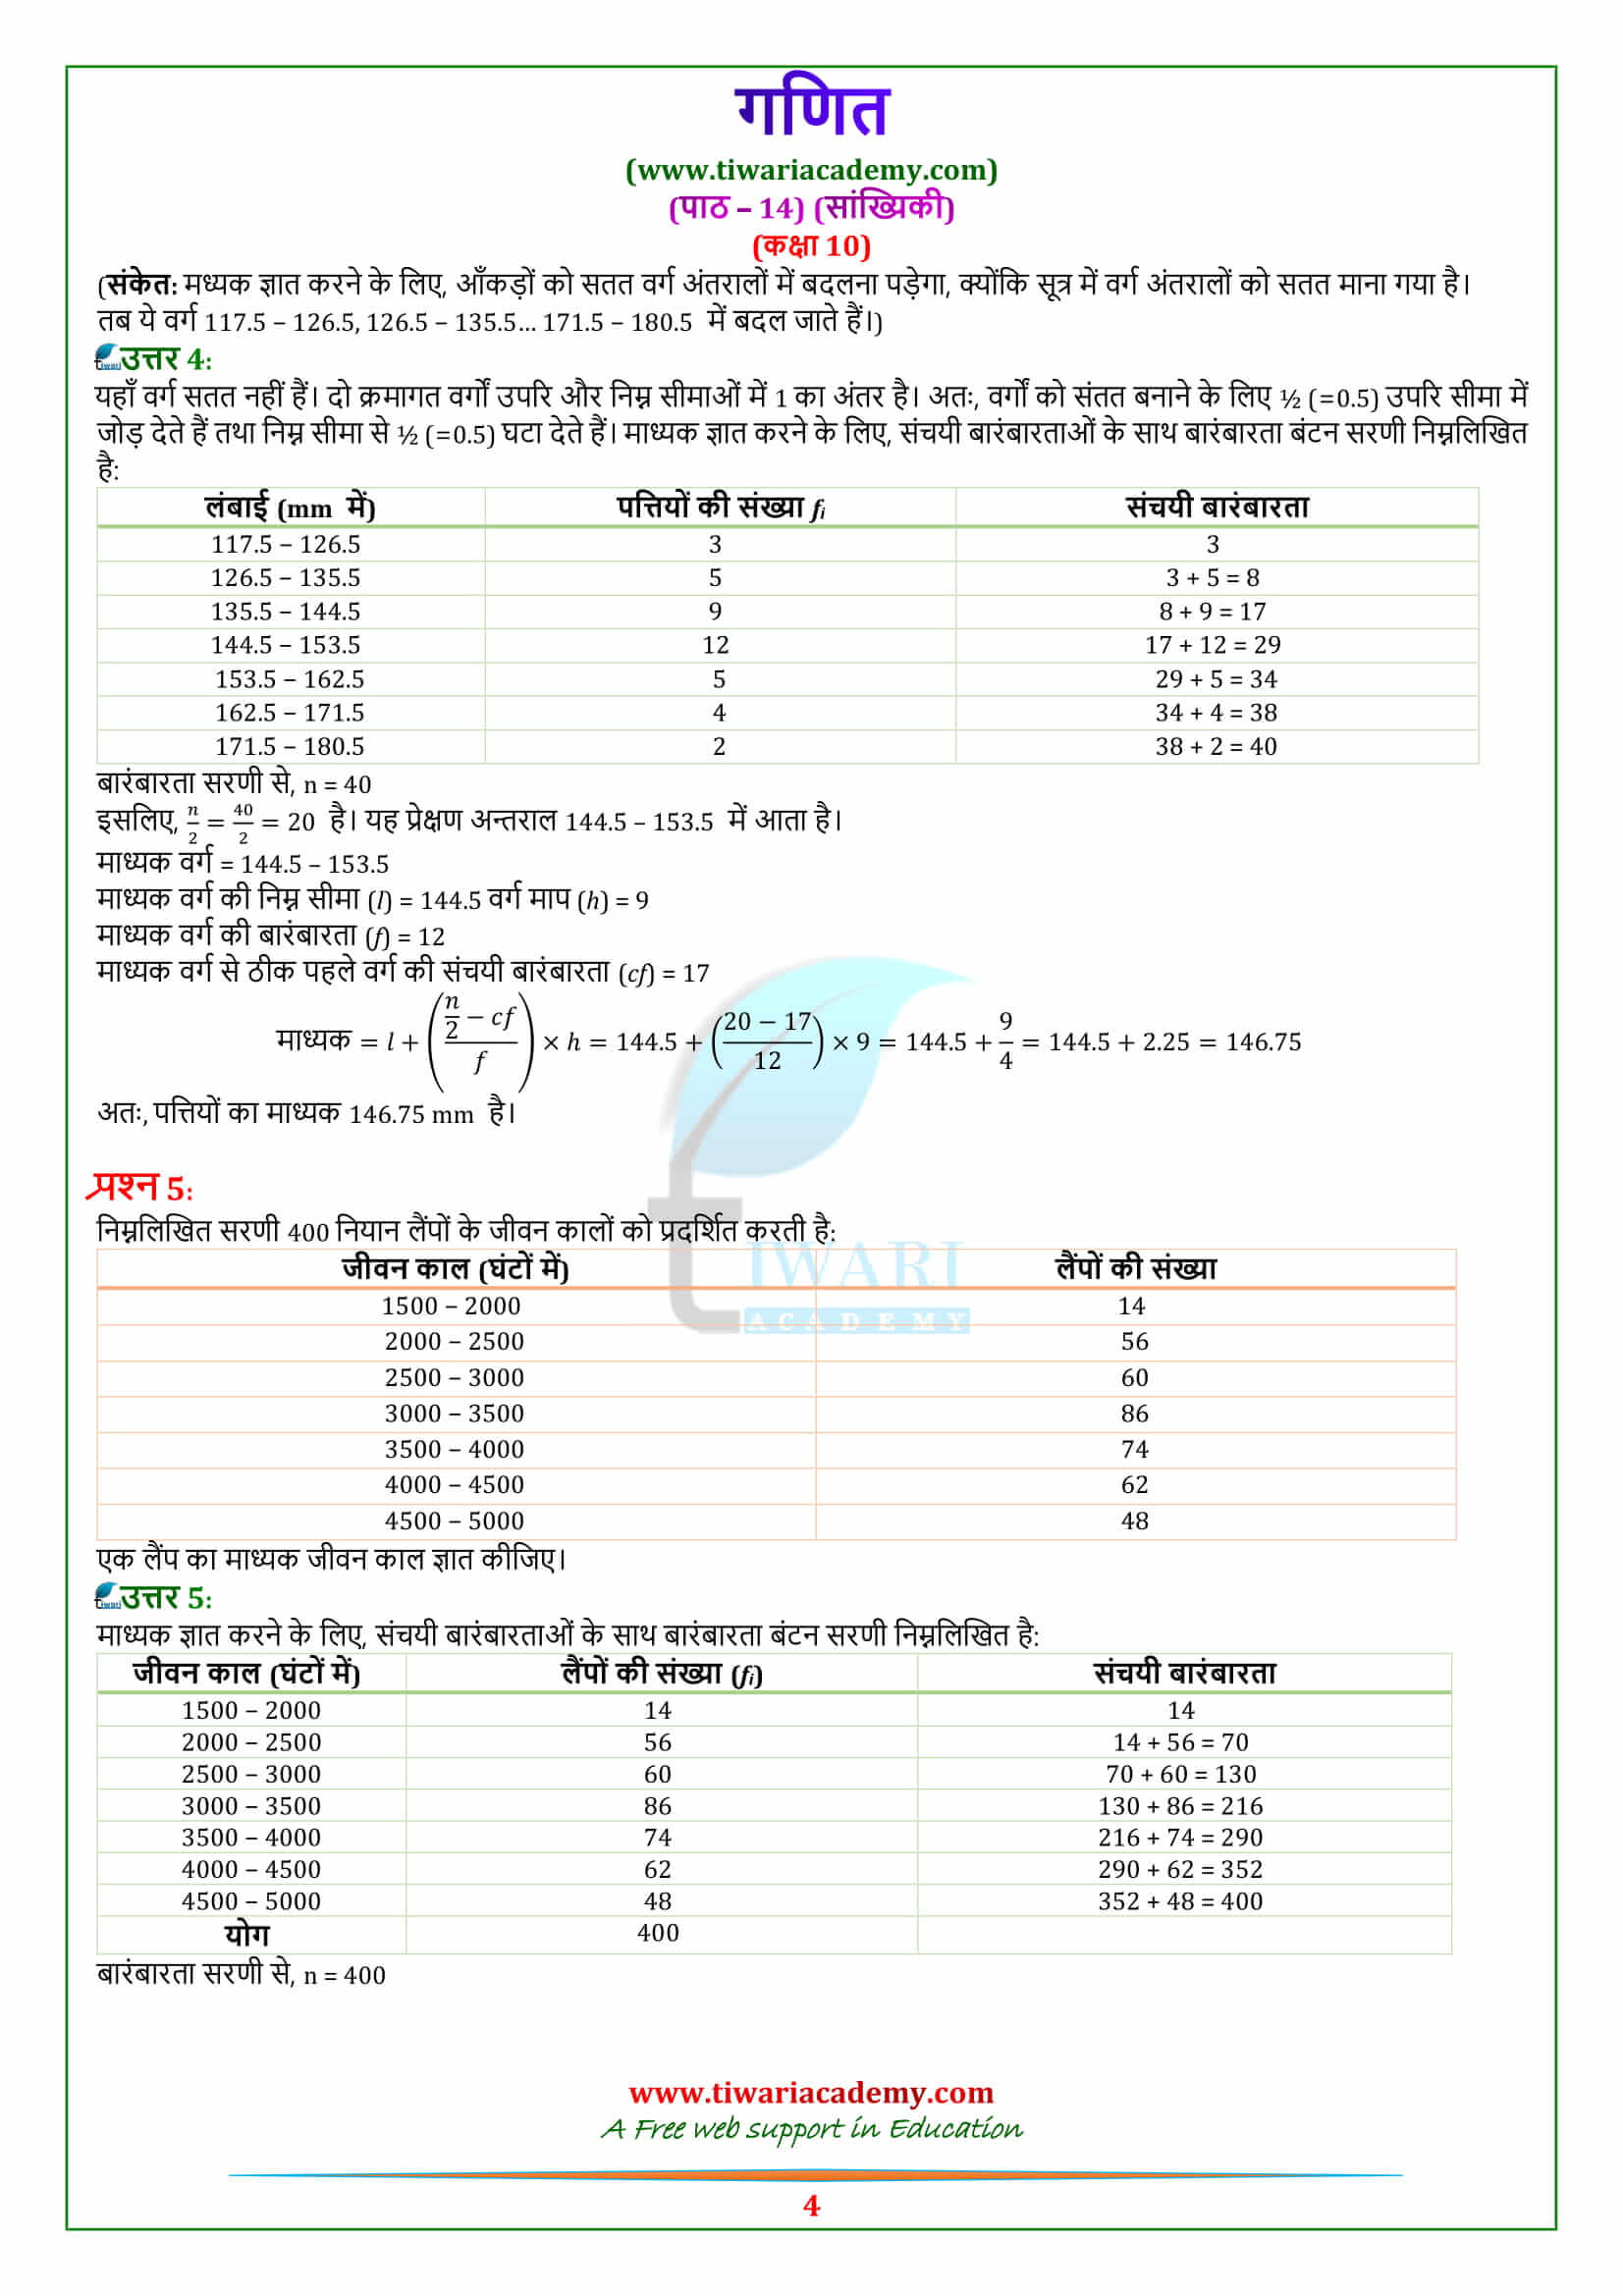 NCERT Solutions for class 10 Maths Chapter 14 Exercise 14.3 free guide